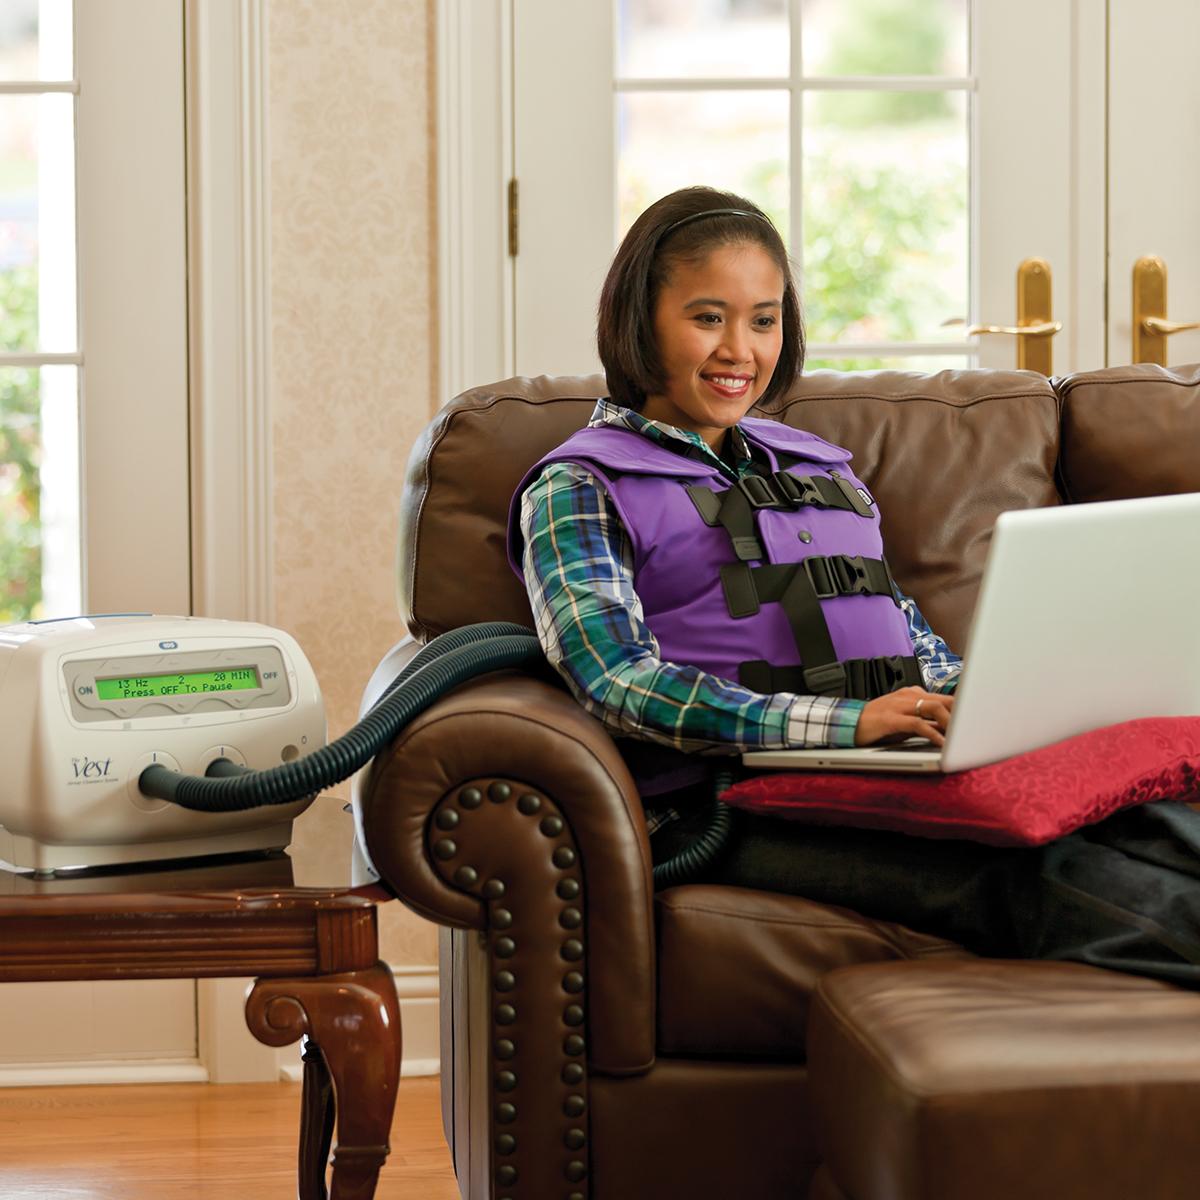 The Vest System, Model 105, Color Me Purple Vest, worn by young woman sitting on couch in living room with laptop computer while doing her treatment